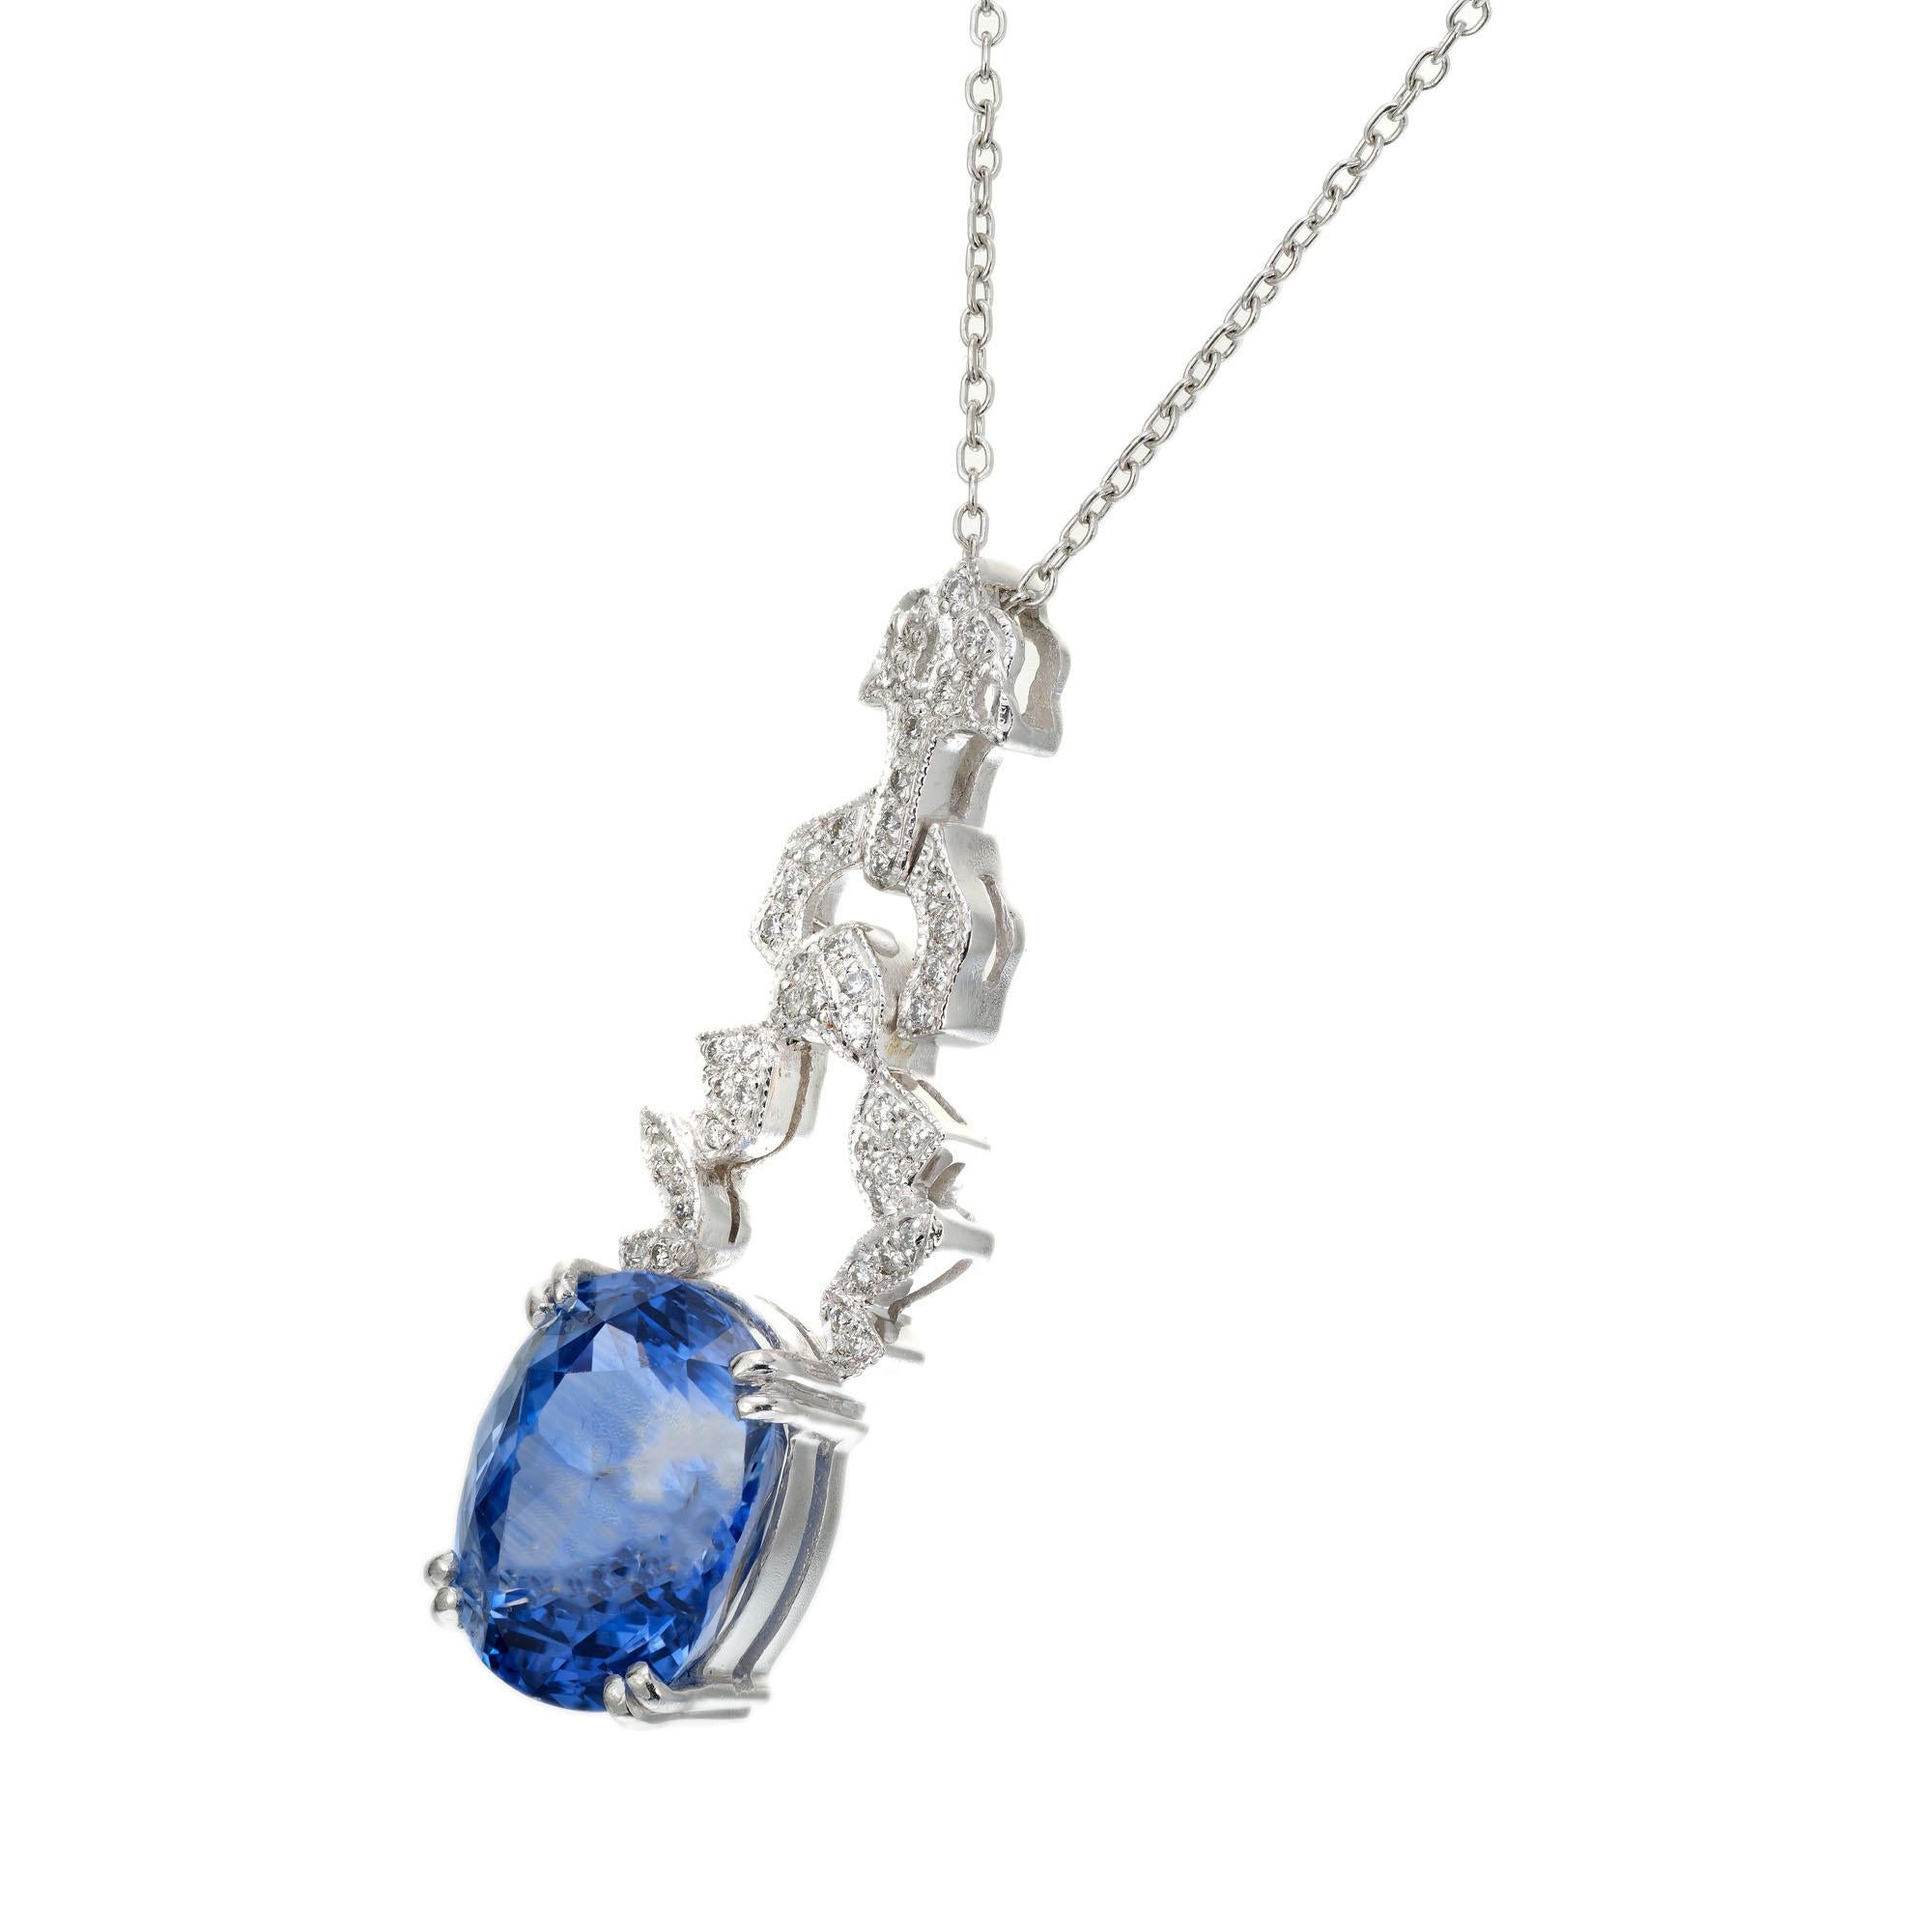 Original Art Deco 1920's sapphire and diamond pendant necklace. This classic Art Deco platinum design encompasses a GIA certified 6.65ct oval sapphire that is accented with 39 round full cut diamonds. Light to medium periwinkle blue natural corundum